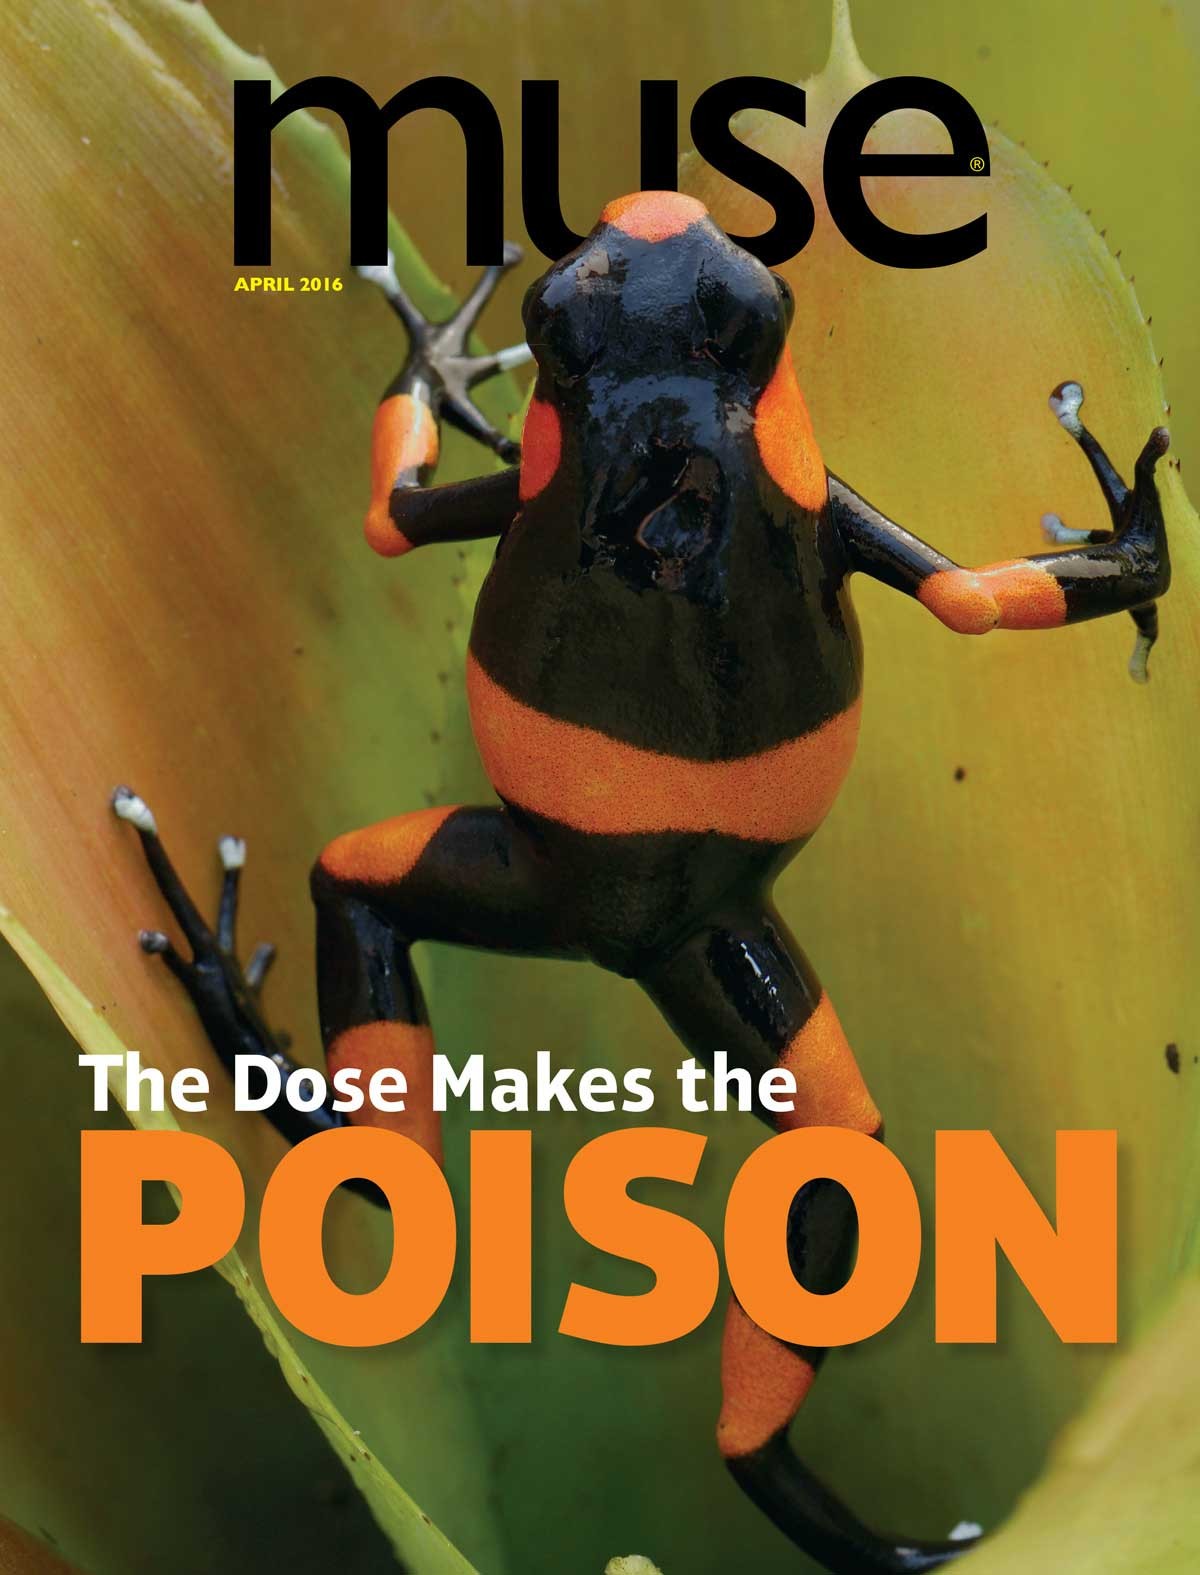 Cover for the Muse April 2016 issue titled The Dose Makes the Poison